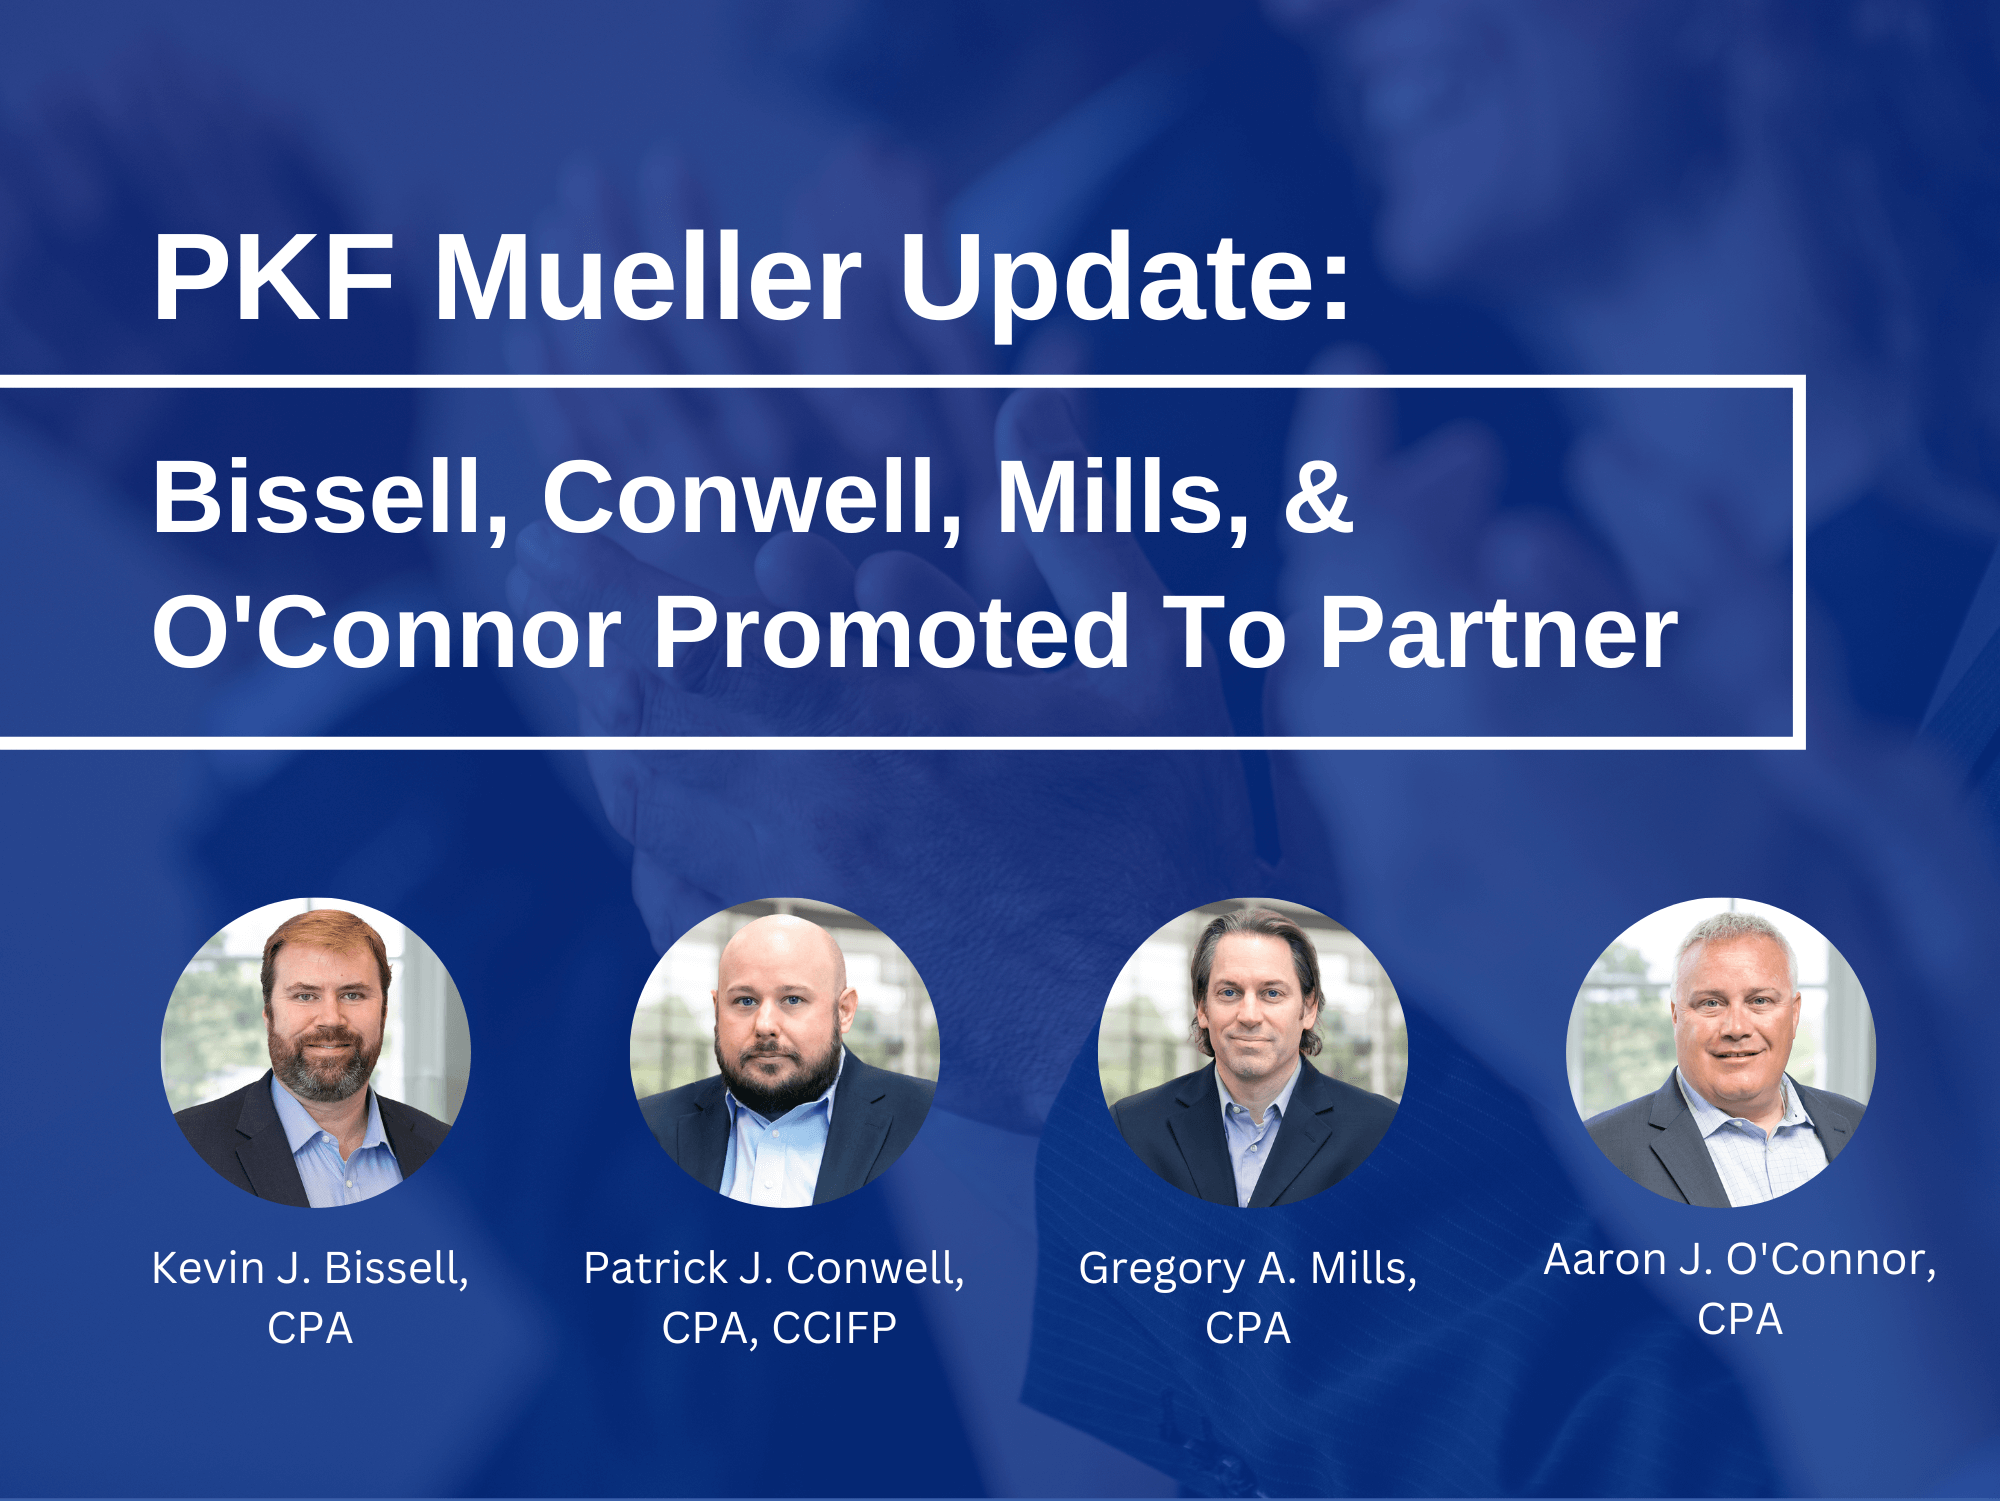 Bissell, Conwell, Mills, and O'Connor Promoted to Partner